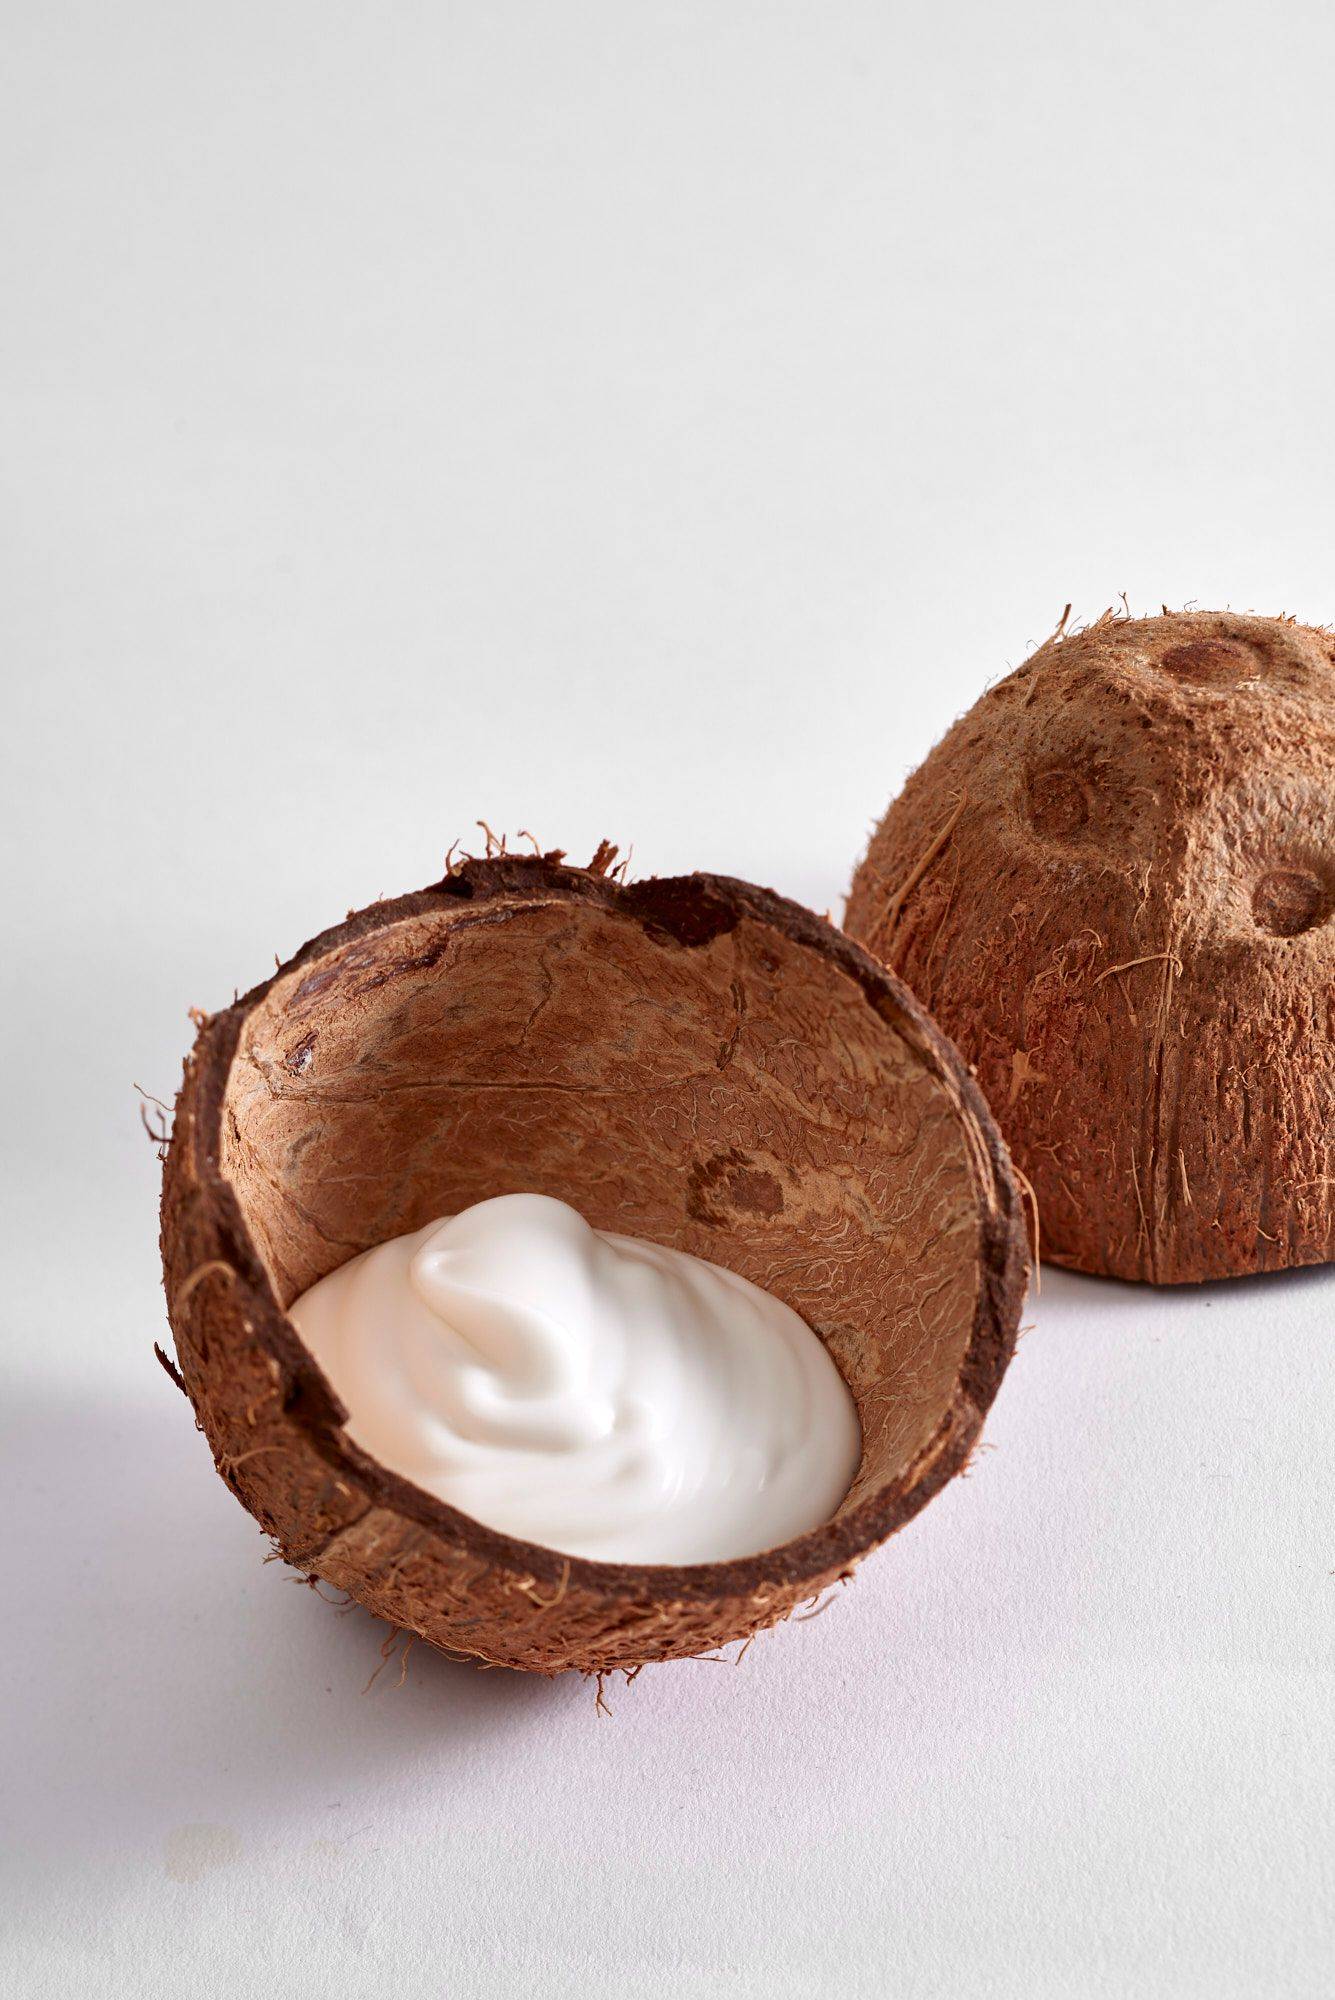 coconut cream in a coconut shell on white background